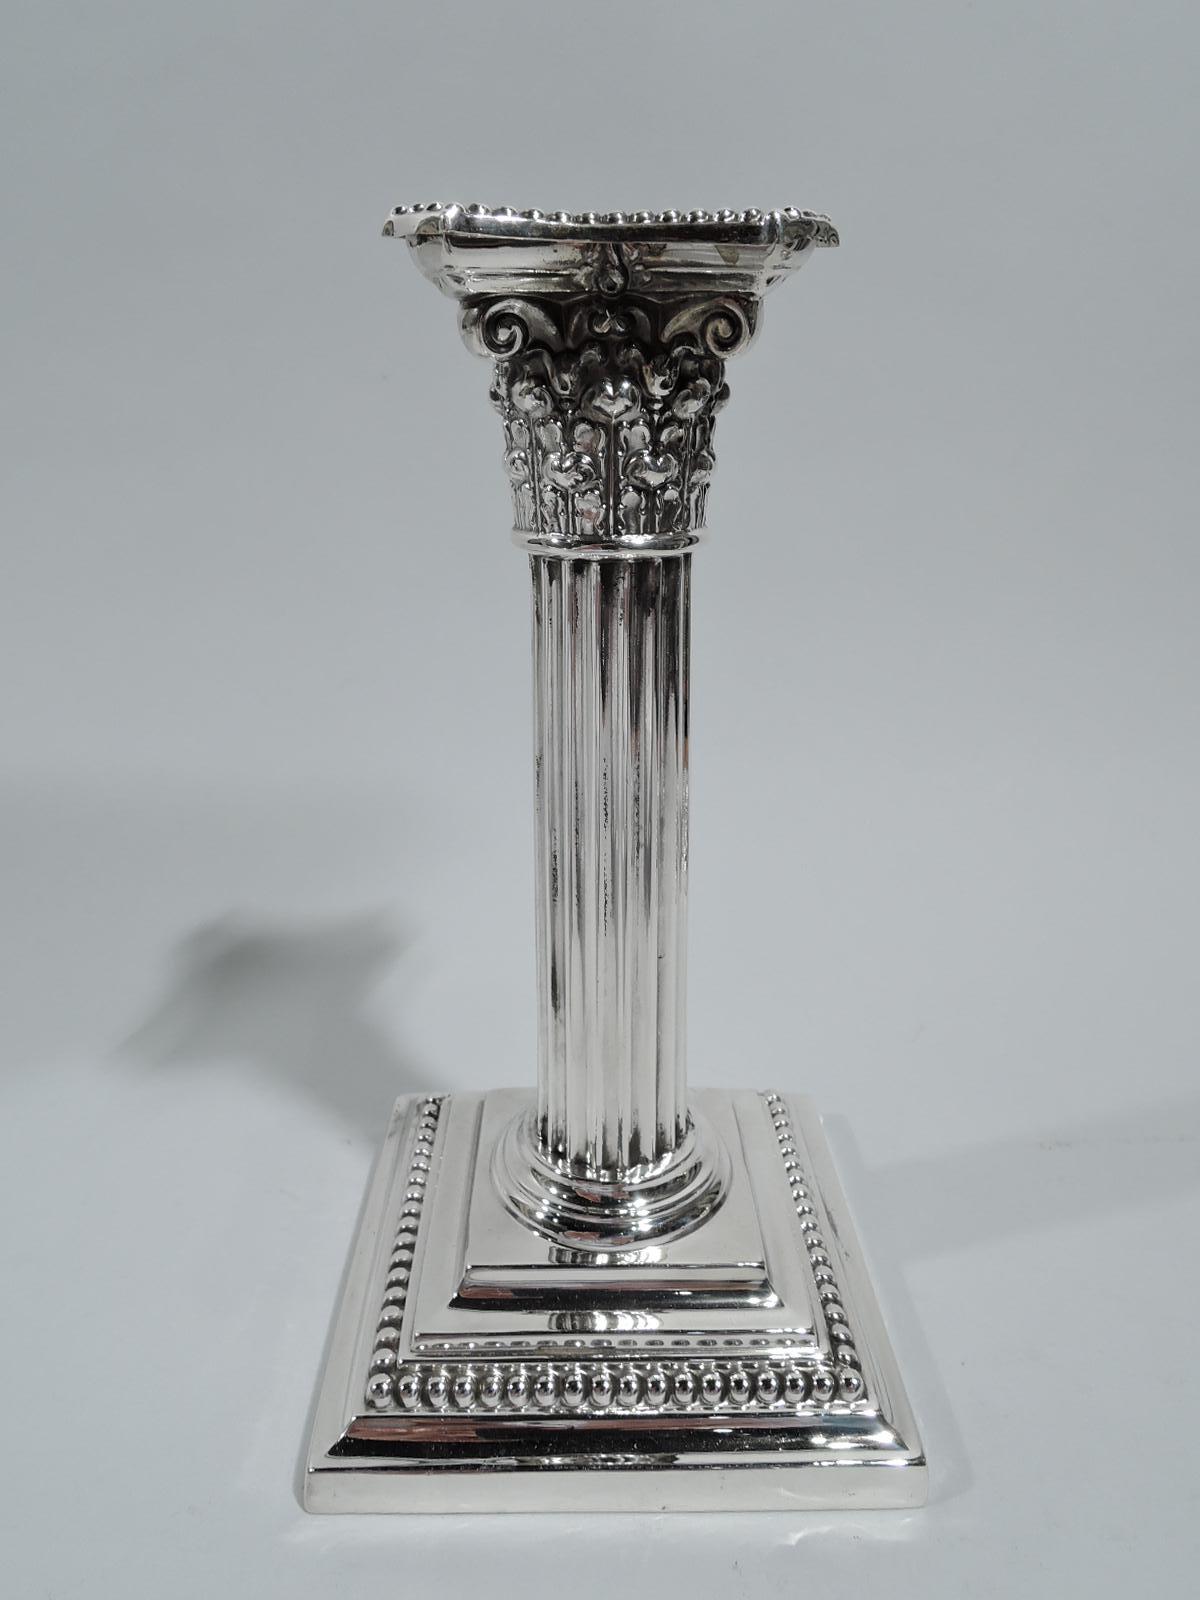 Edwardian Classical sterling silver candlesticks. Made by Gorham in Providence in 1904. Each: Fluted column with composite Corinthian capital and stepped square foot. Detachable bobeche. Beading. Fully marked including maker’s stamp, no. A3204, and